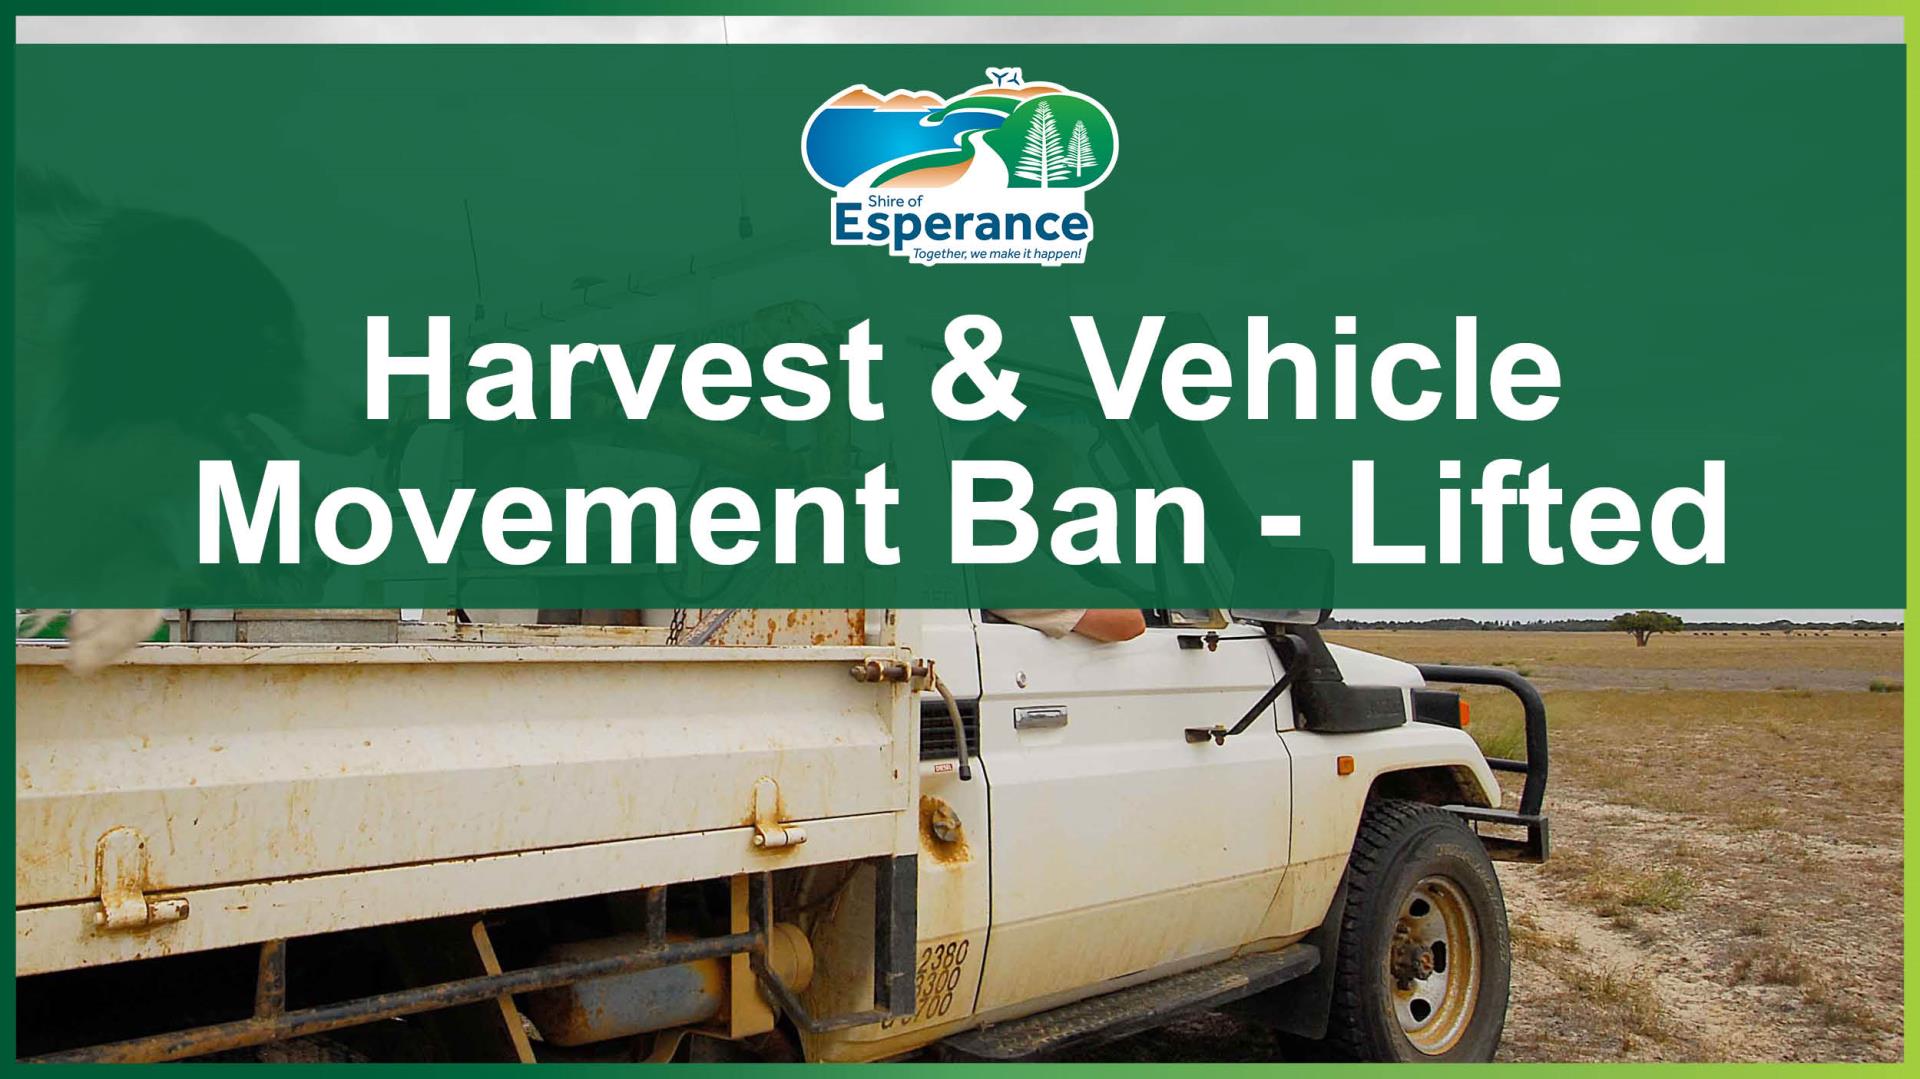 Harvest & Vechicle Movement Ban - Lifted